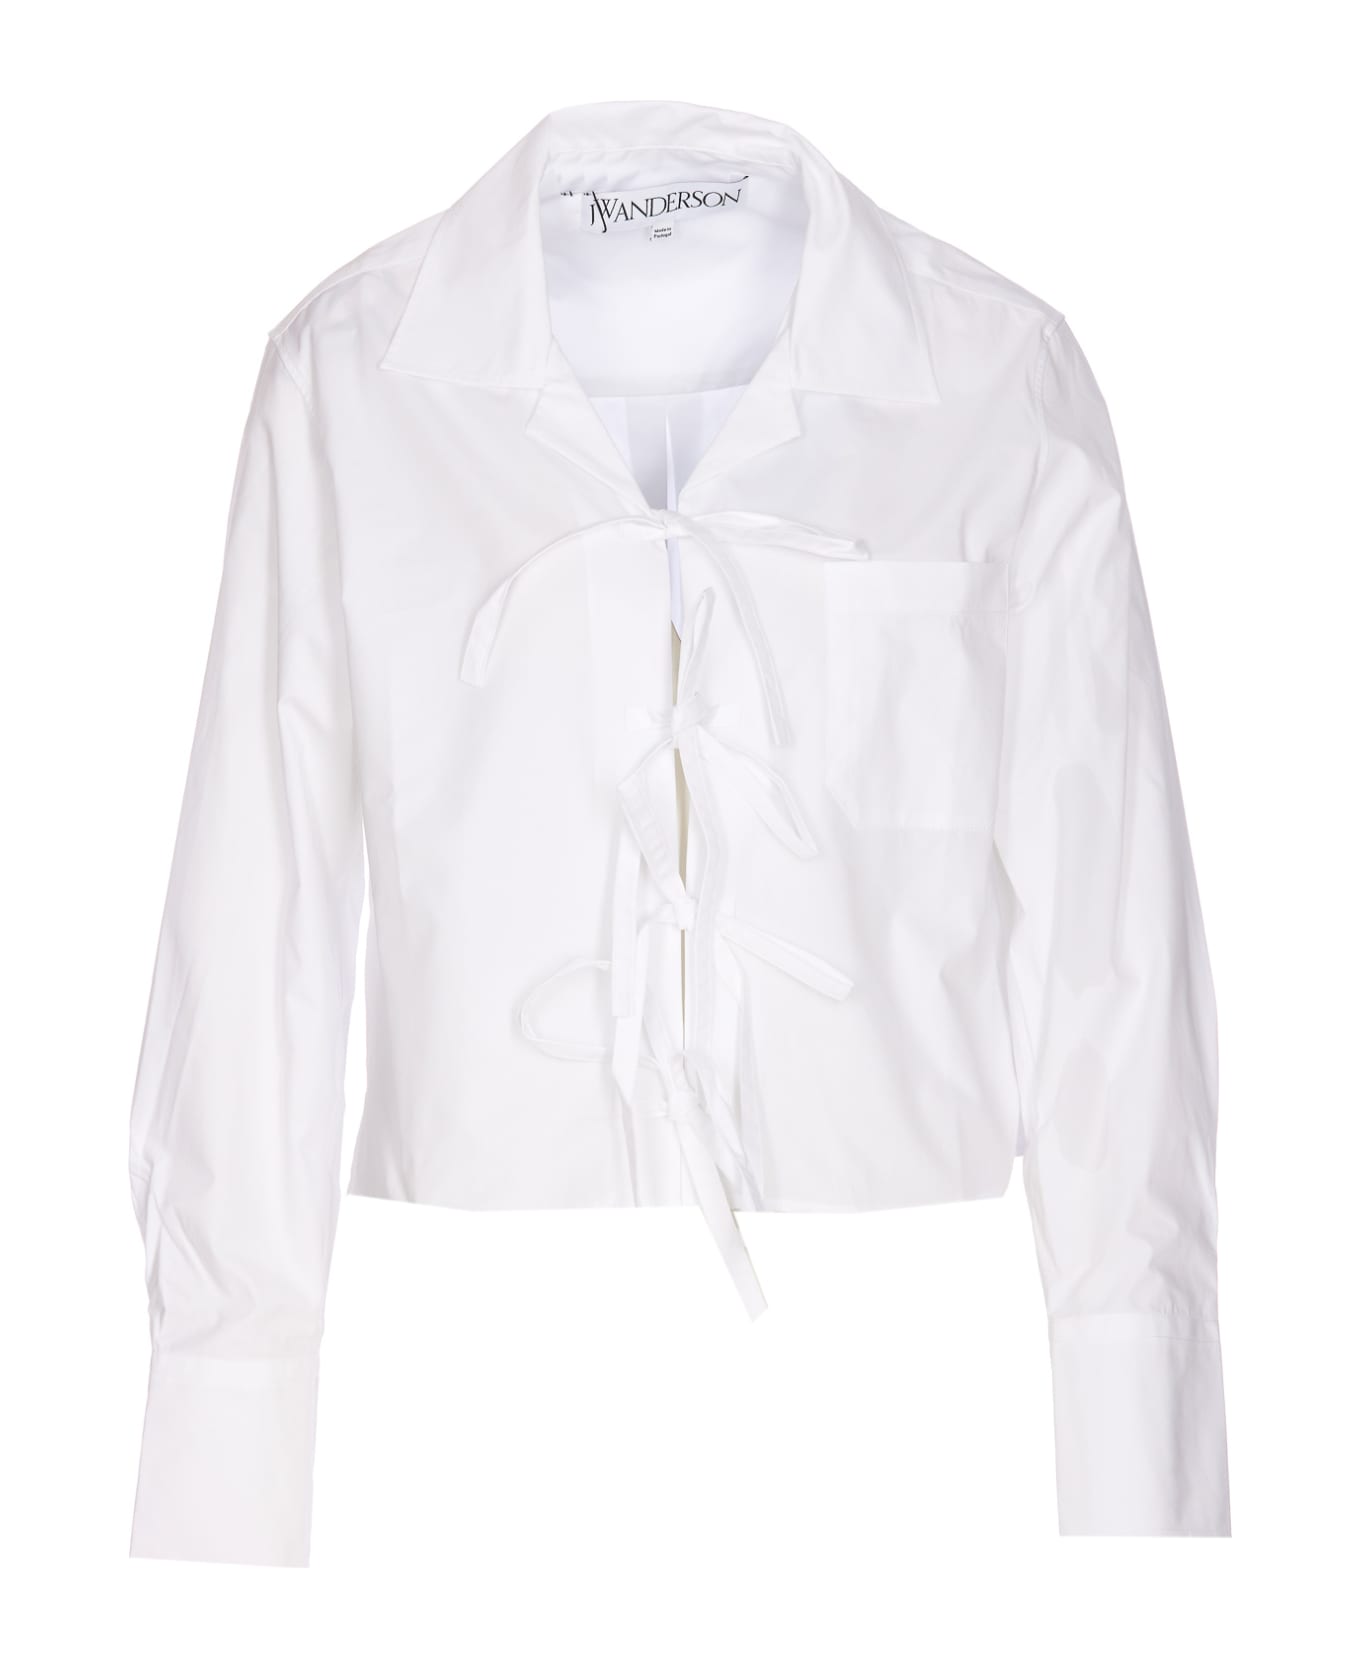 J.W. Anderson Bow Tie Cropped Shirt - White